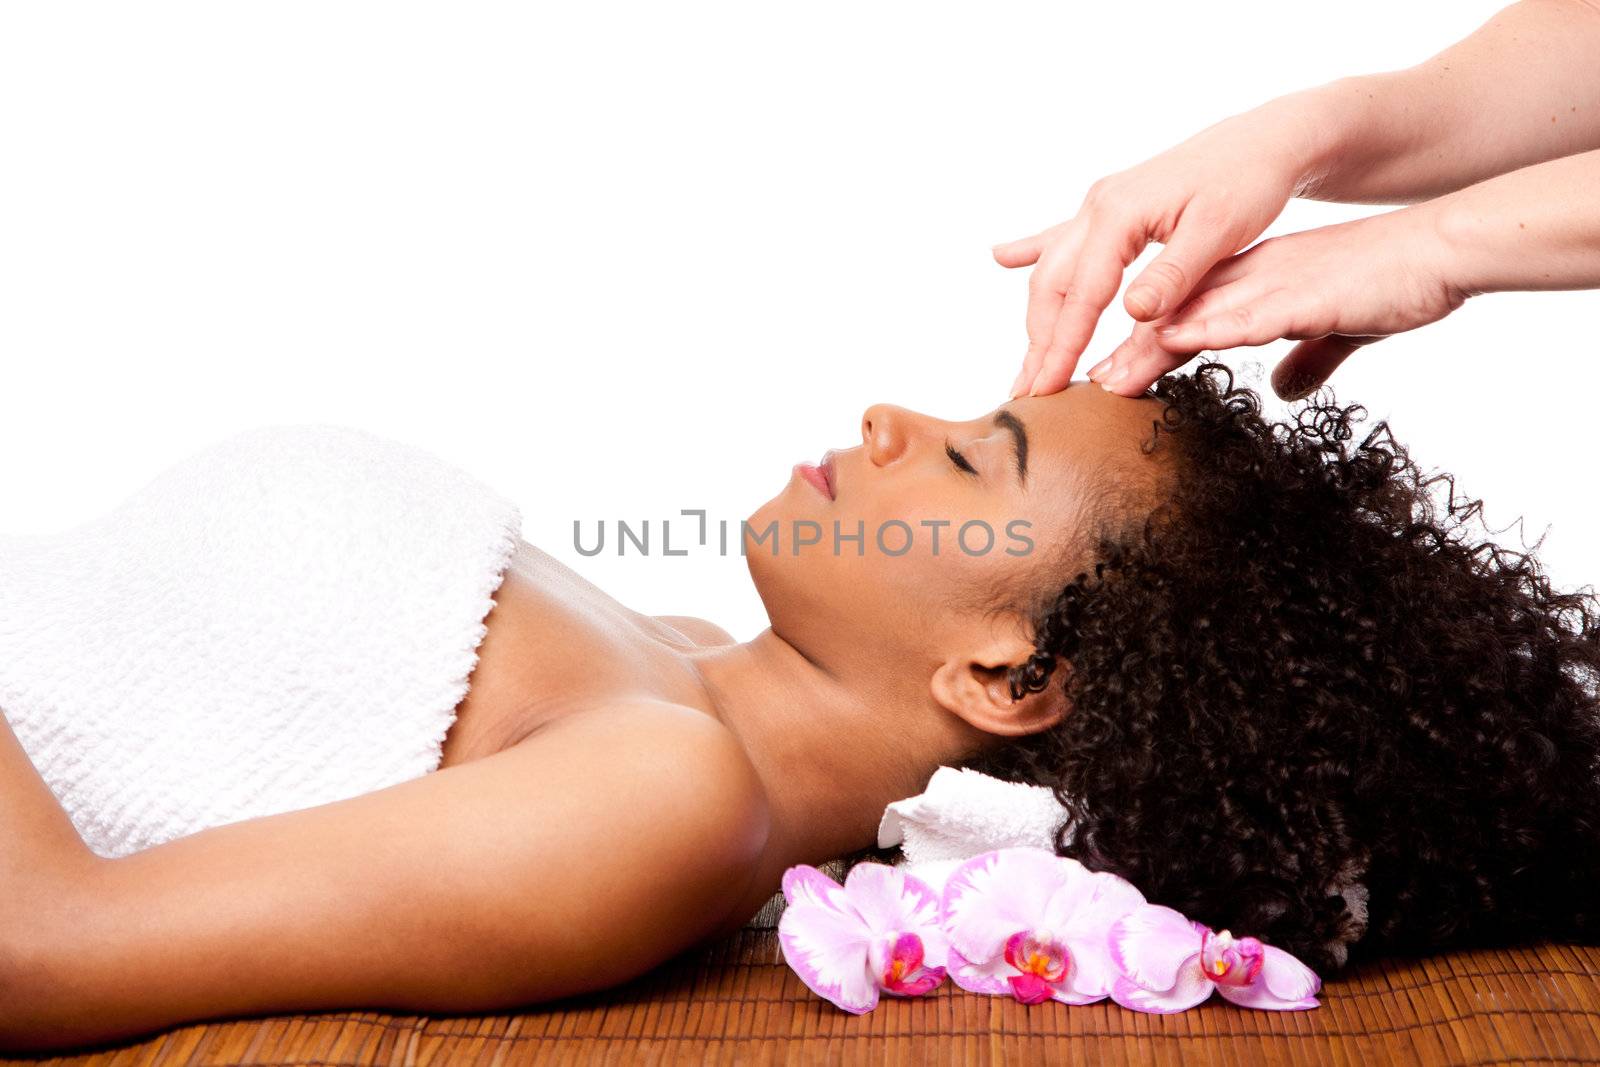 Beautiful happy peaceful sleeping woman at day spa, laying on bamboo massage table with head on pillow wearing a towel getting a facial massage, isolated.